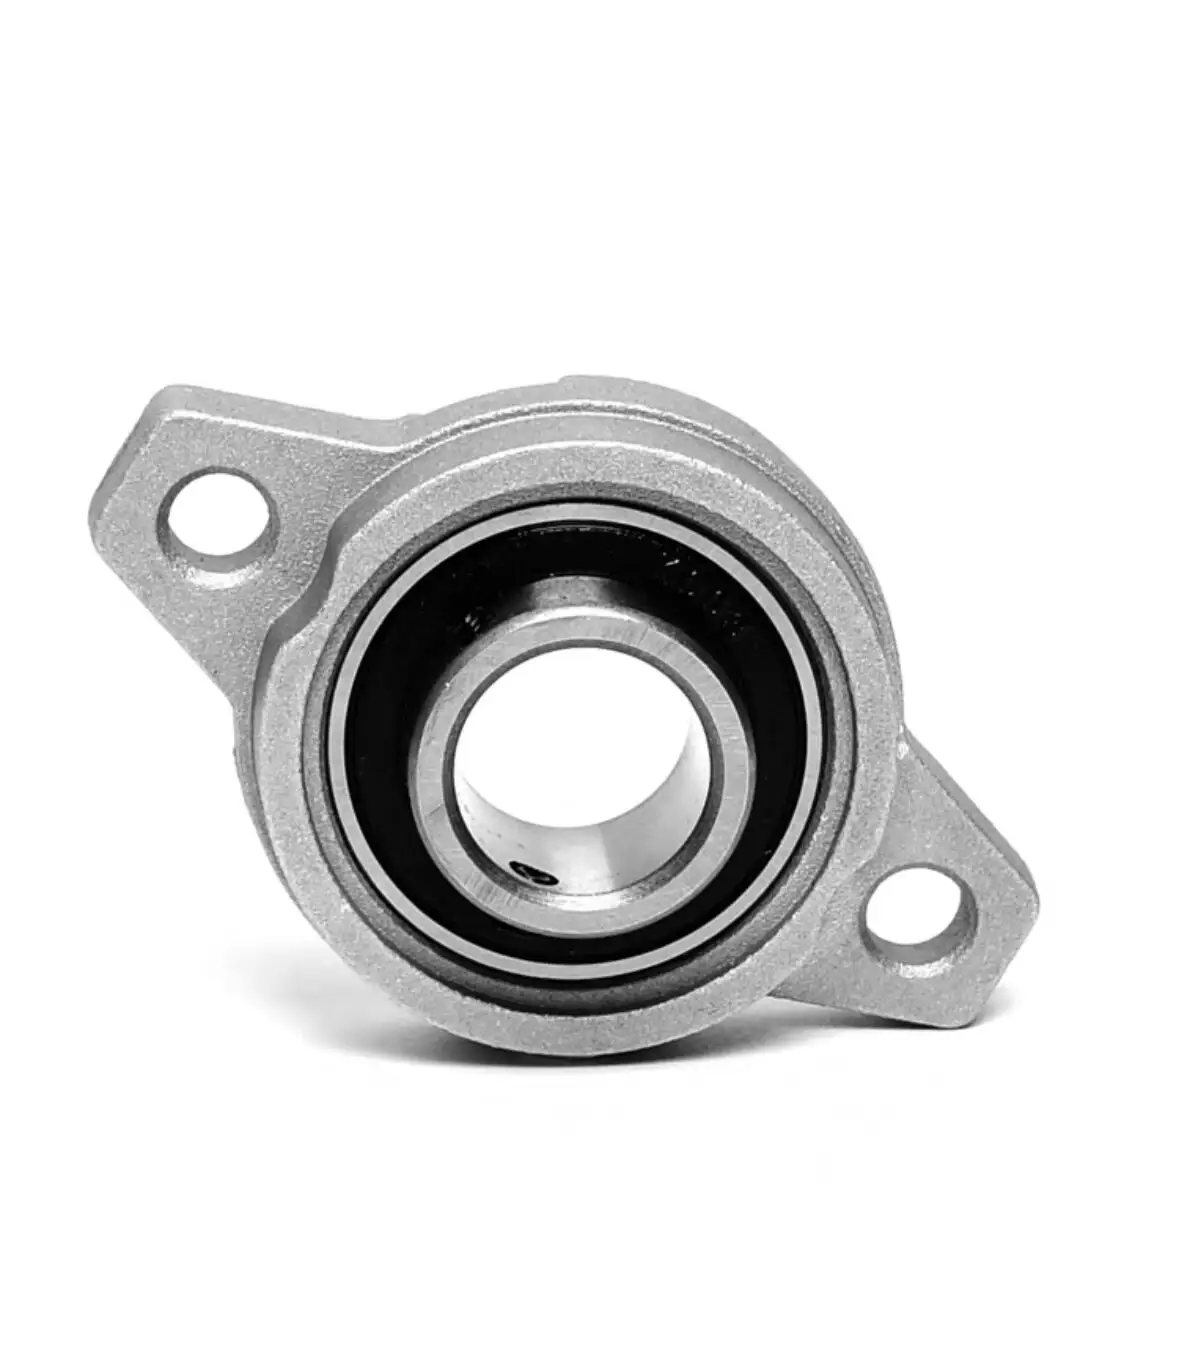 High quality plastic seat with stainless steel outer spherical bearing - flange UN